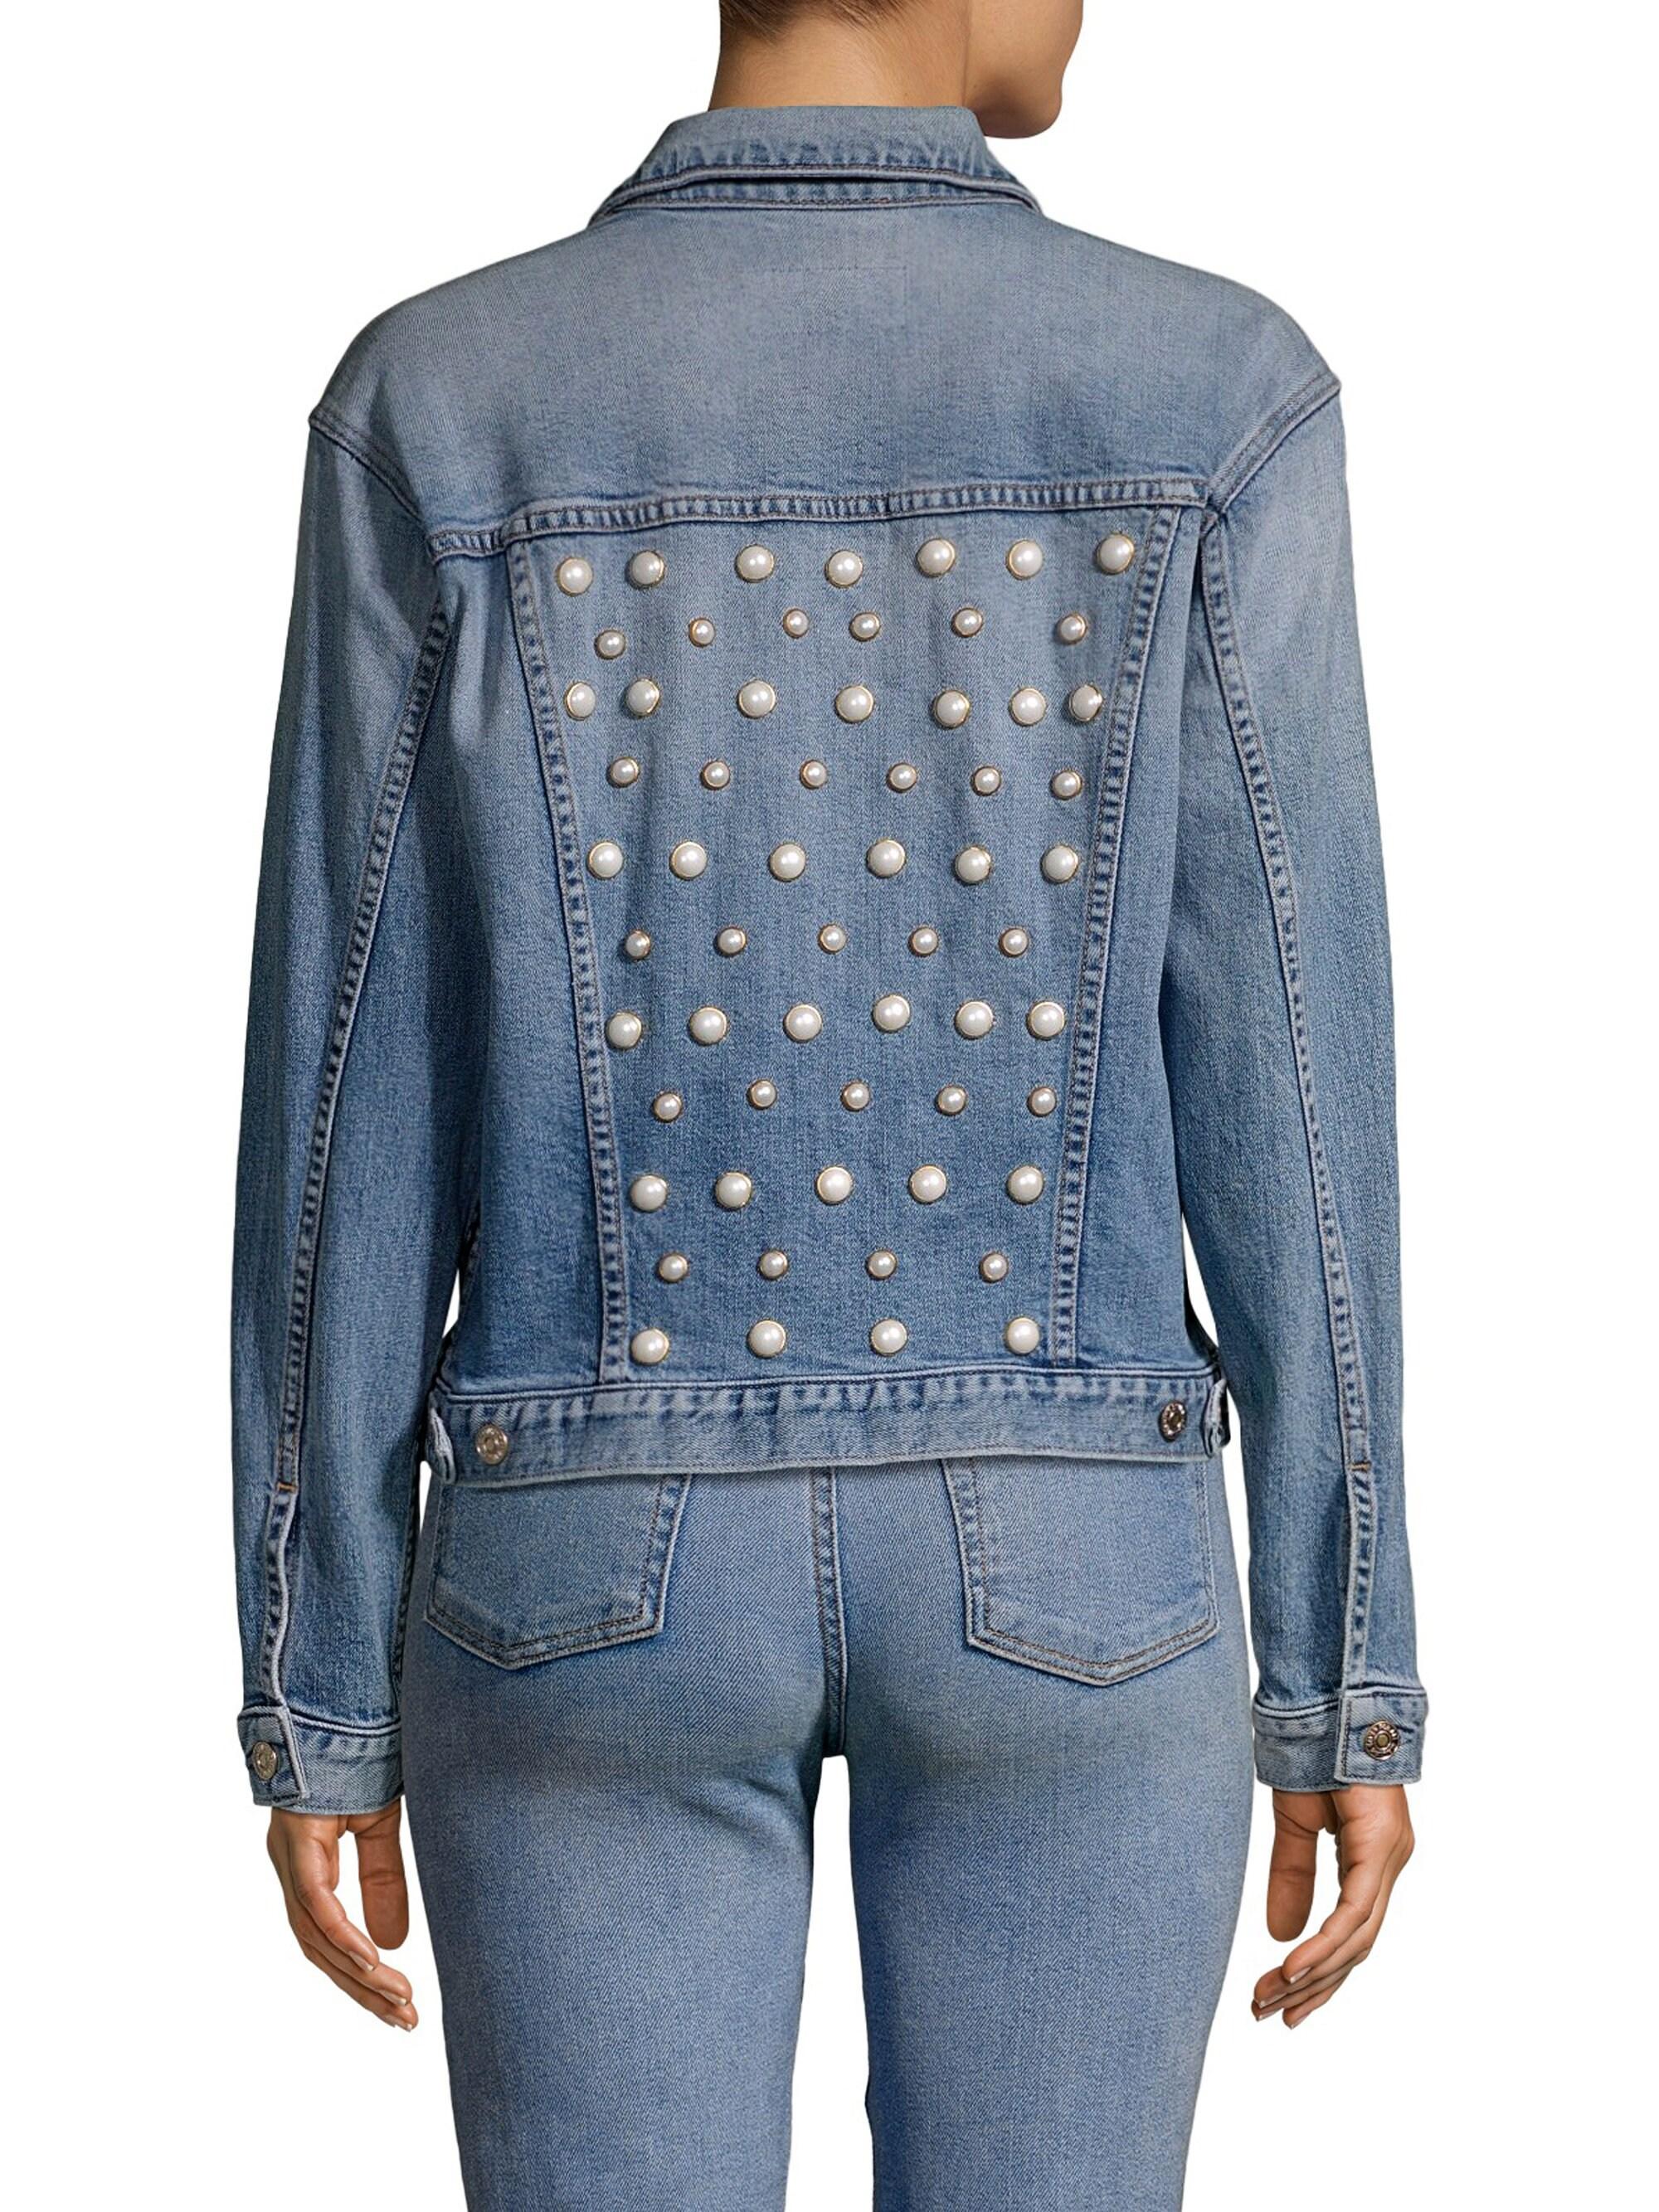 7 For All Mankind Women's Faux Pearl Embellished Denim Jacket - Pearl ...